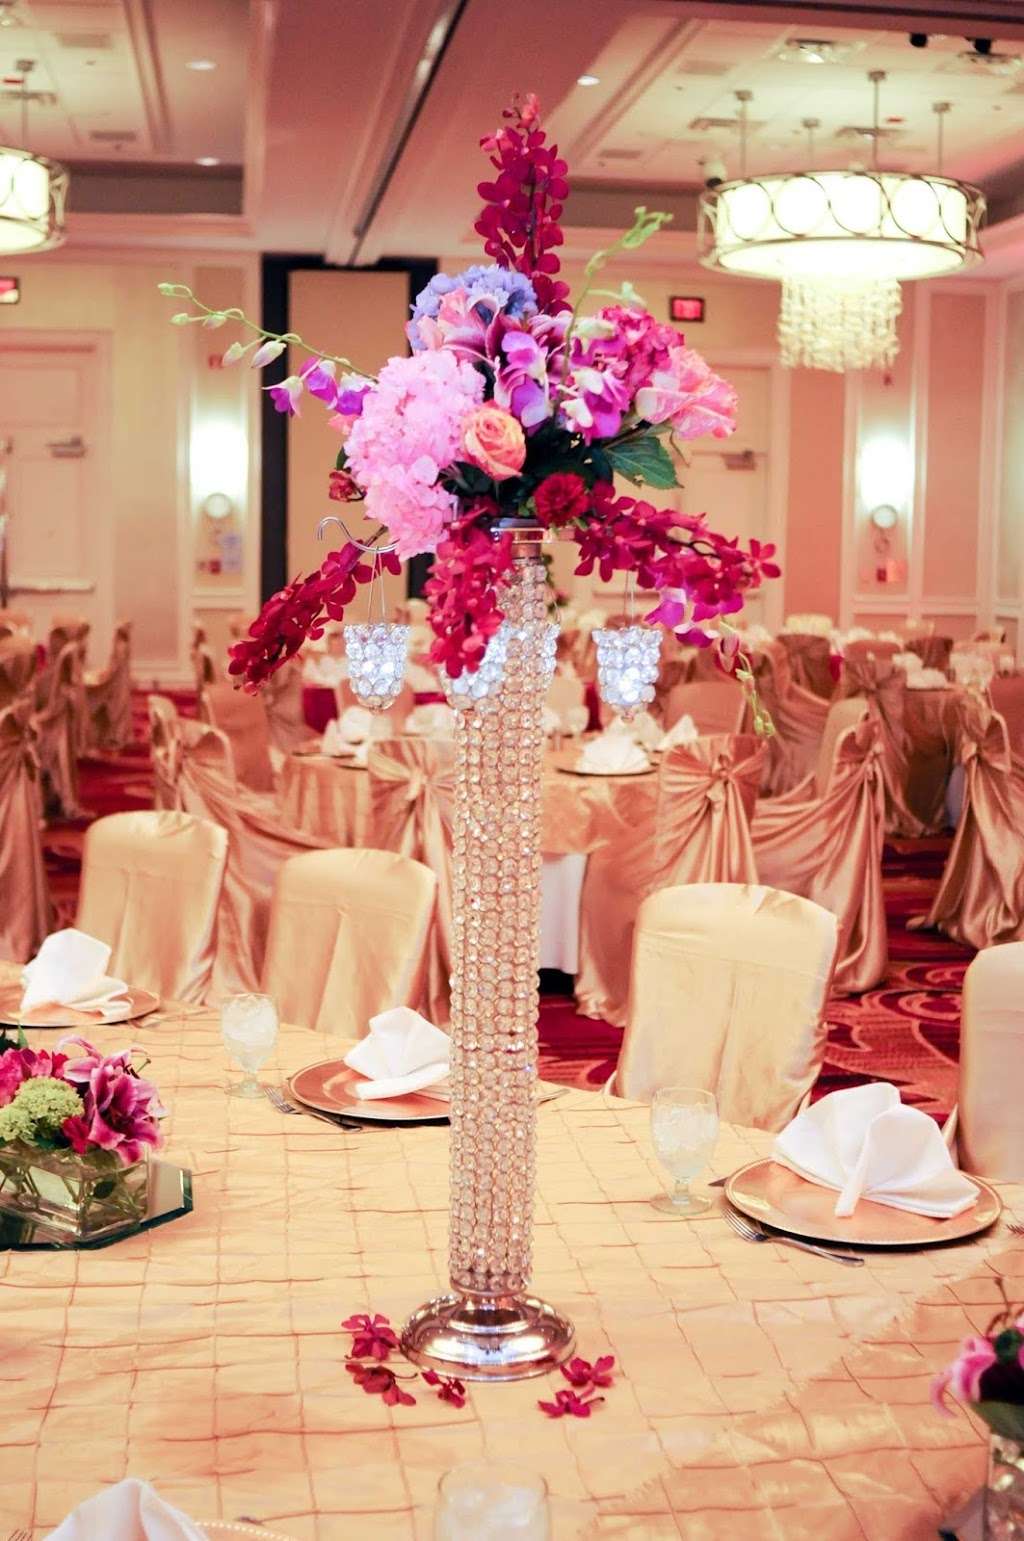 Americas Beautiful Florist | 414 Hungerford Dr #112, Rockville, MD 20850 | Phone: (301) 251-0500